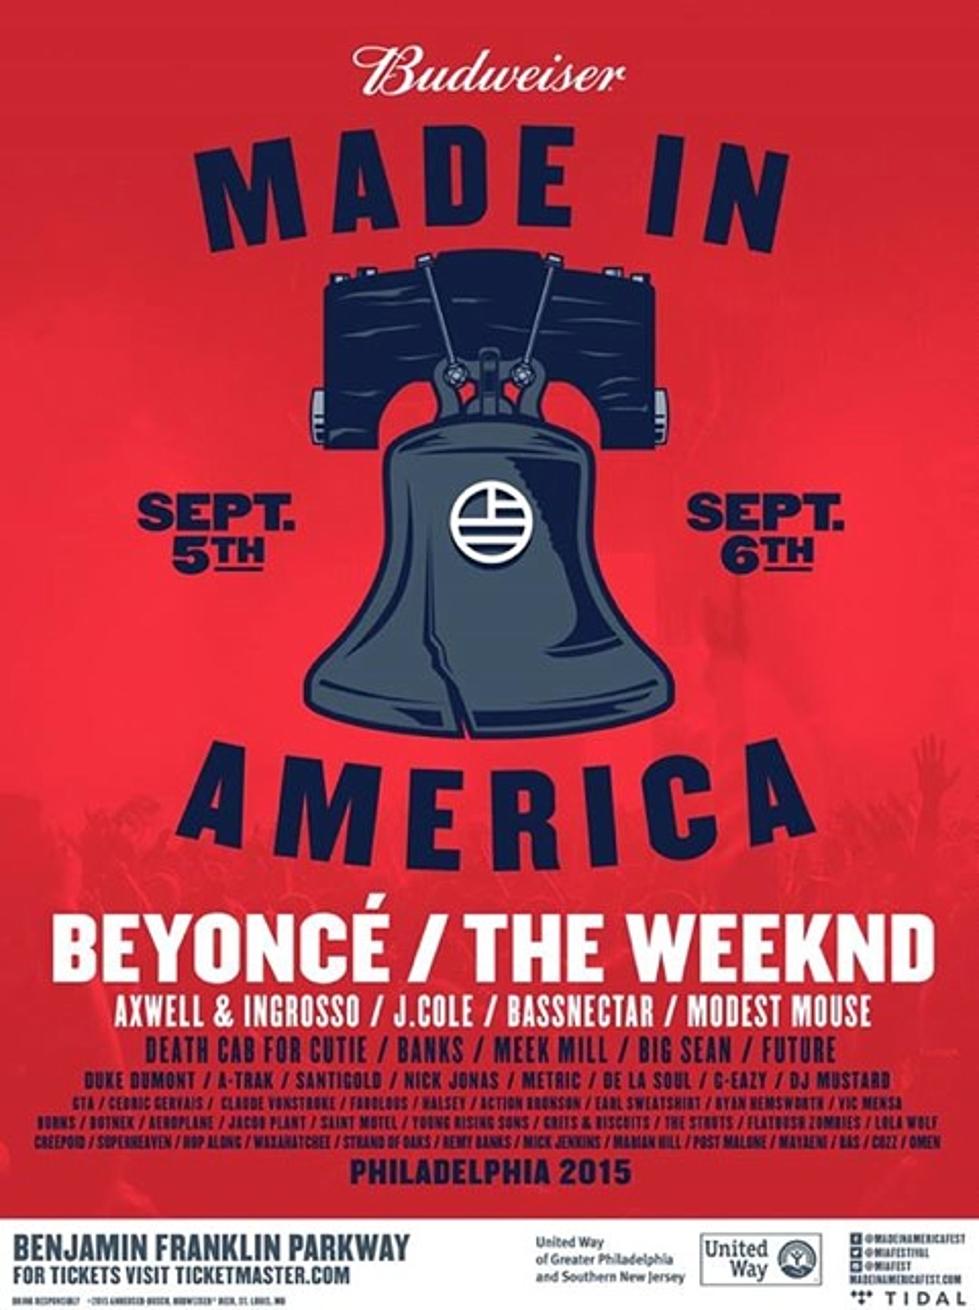 Made In America 2015 lineup &#038; tix: Beyonce, The Weeknd, J Cole, Modest Mouse, Death Cab, Earl Sweatshirt &#038; more